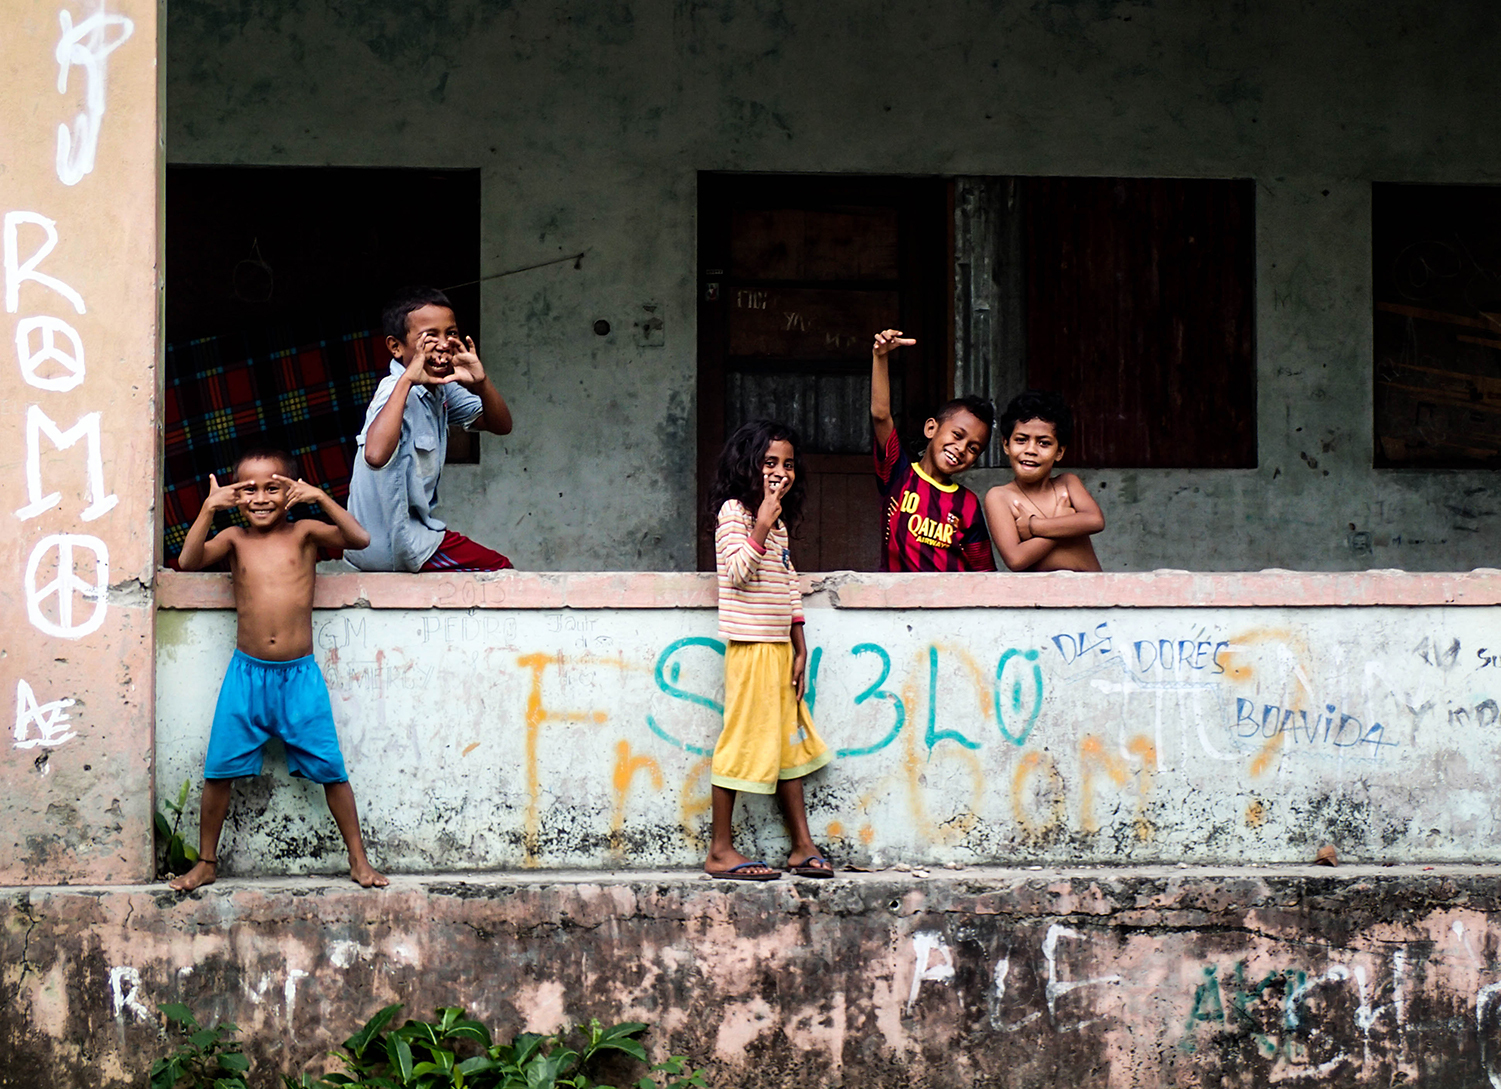 <p>A group of kids very amused to have their picture taken. <br /></p><p>Part of the graffiti reads 'Das dores boavida', which can translate as 'From pain, a good life'.<br /></p>